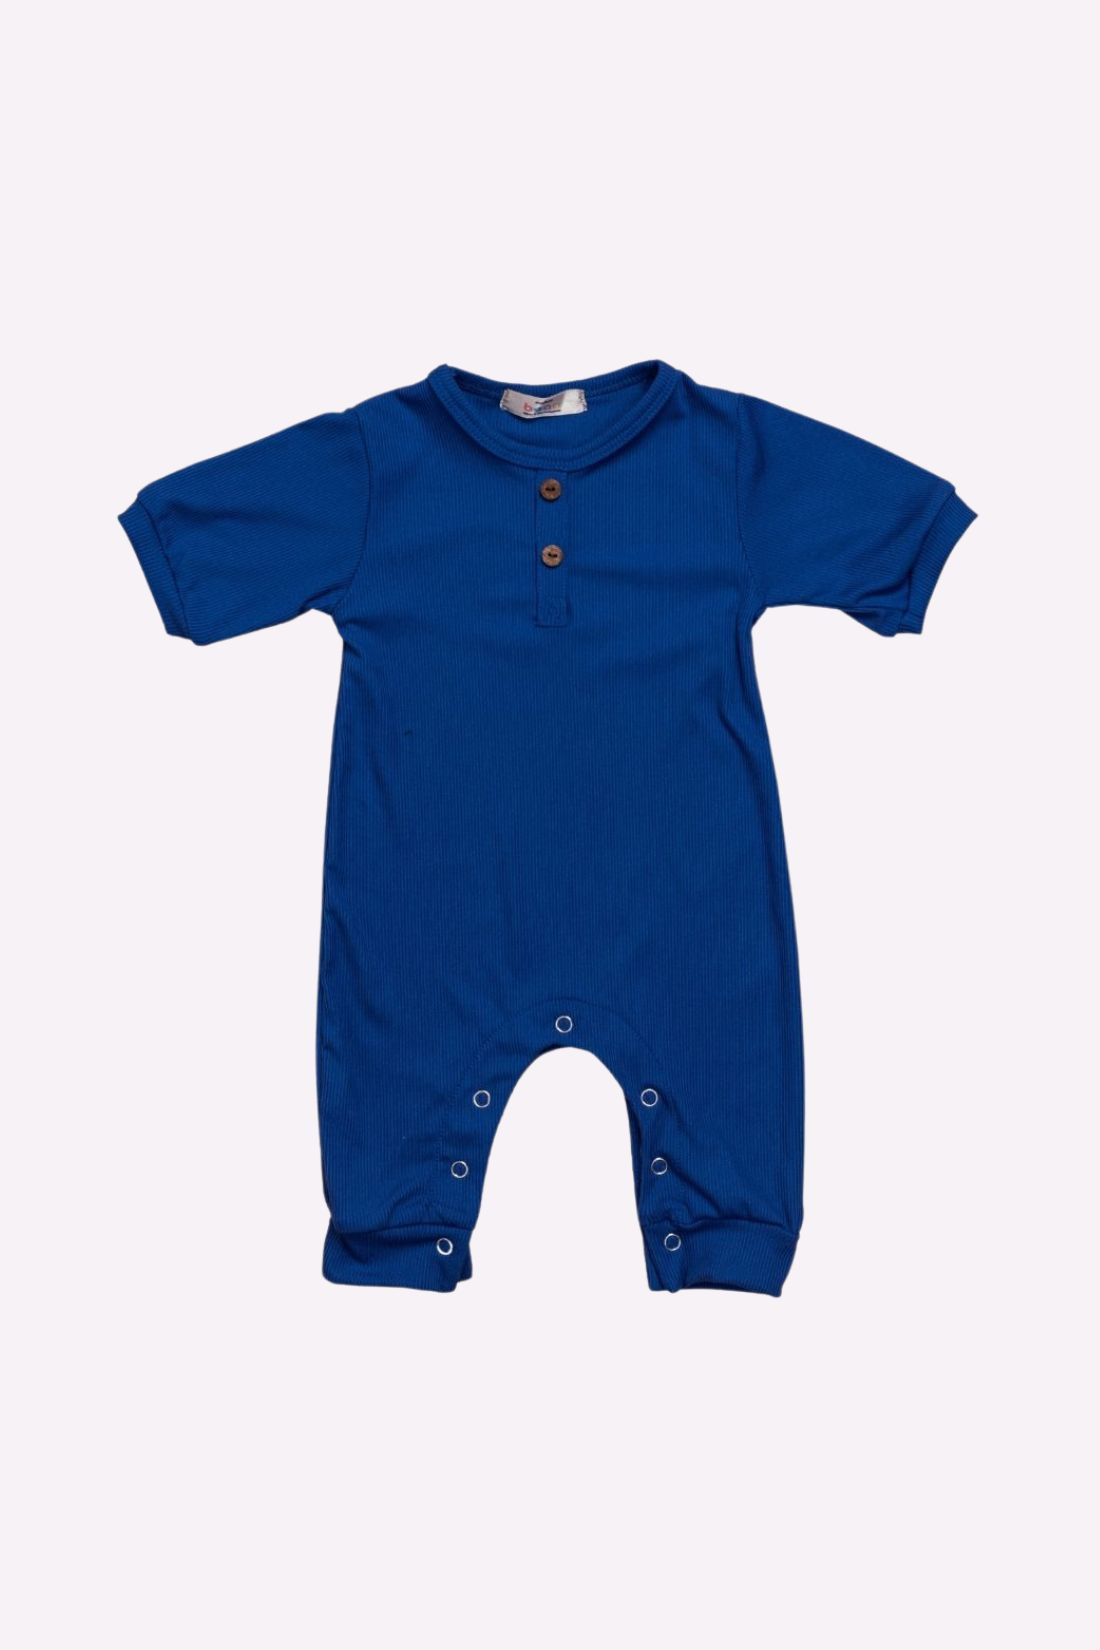 Set of 2 Rompers Rust Royal Blue